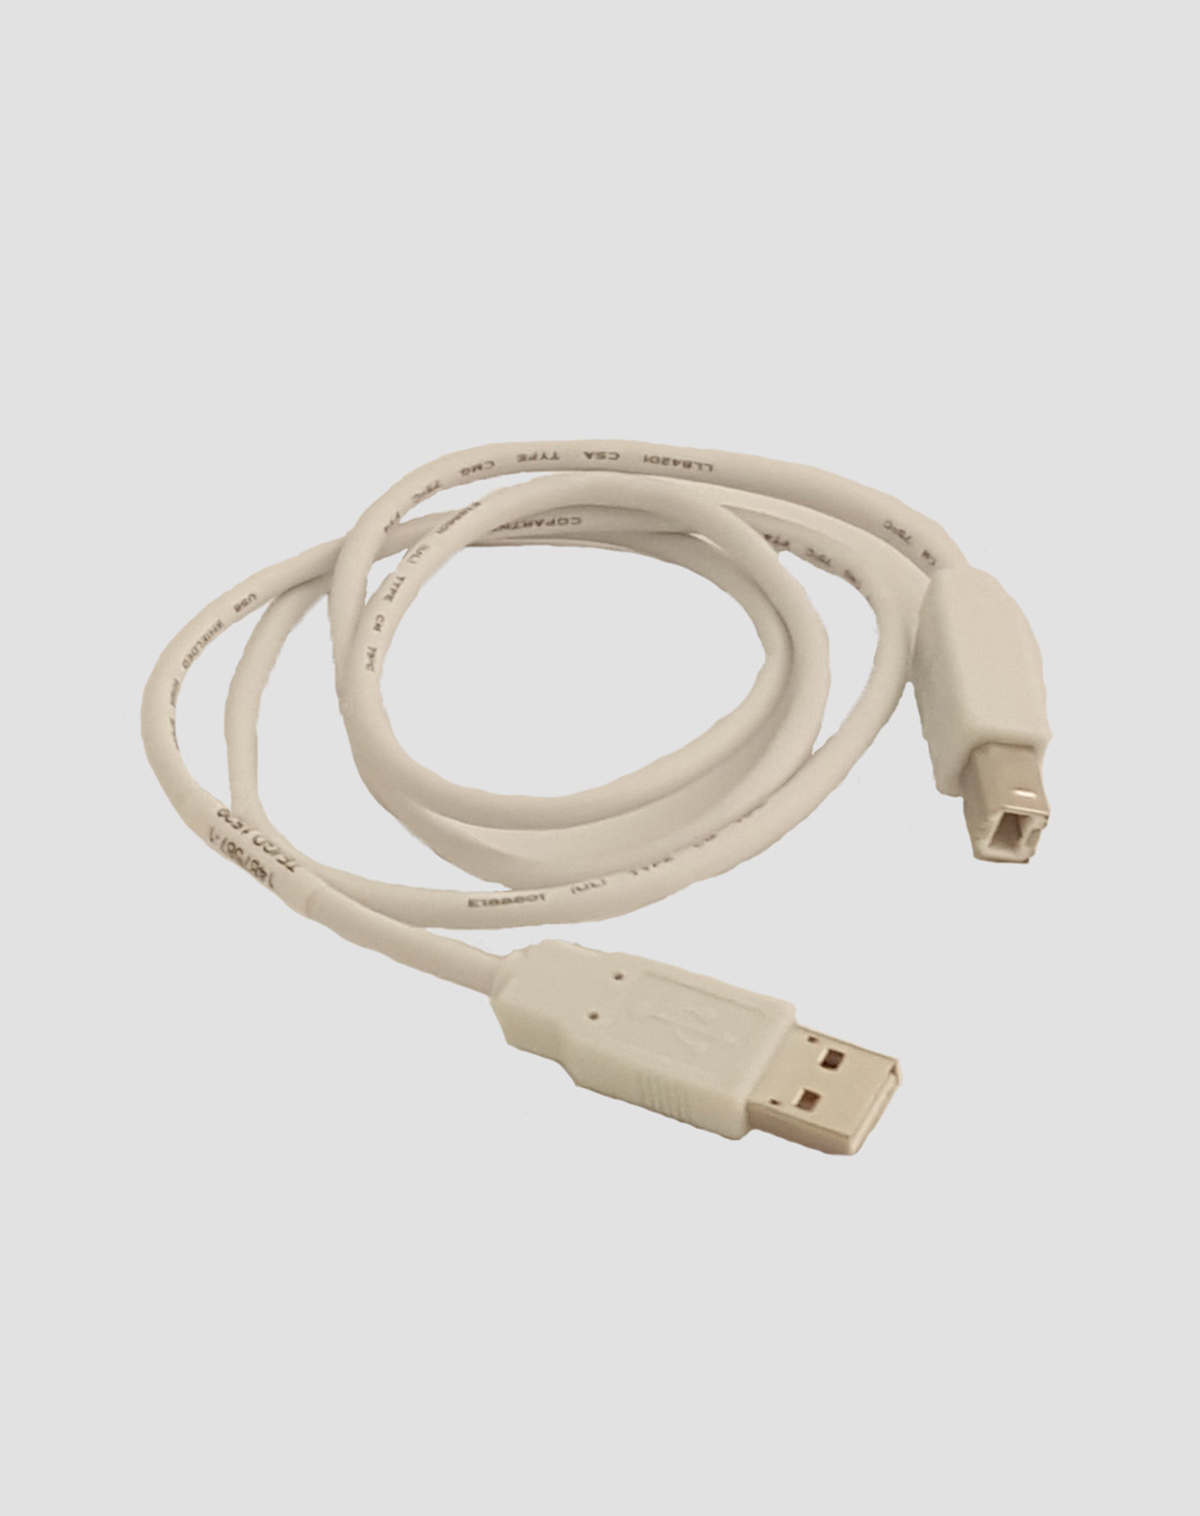 ALL-TEST PRO MD III™ USB-Cable